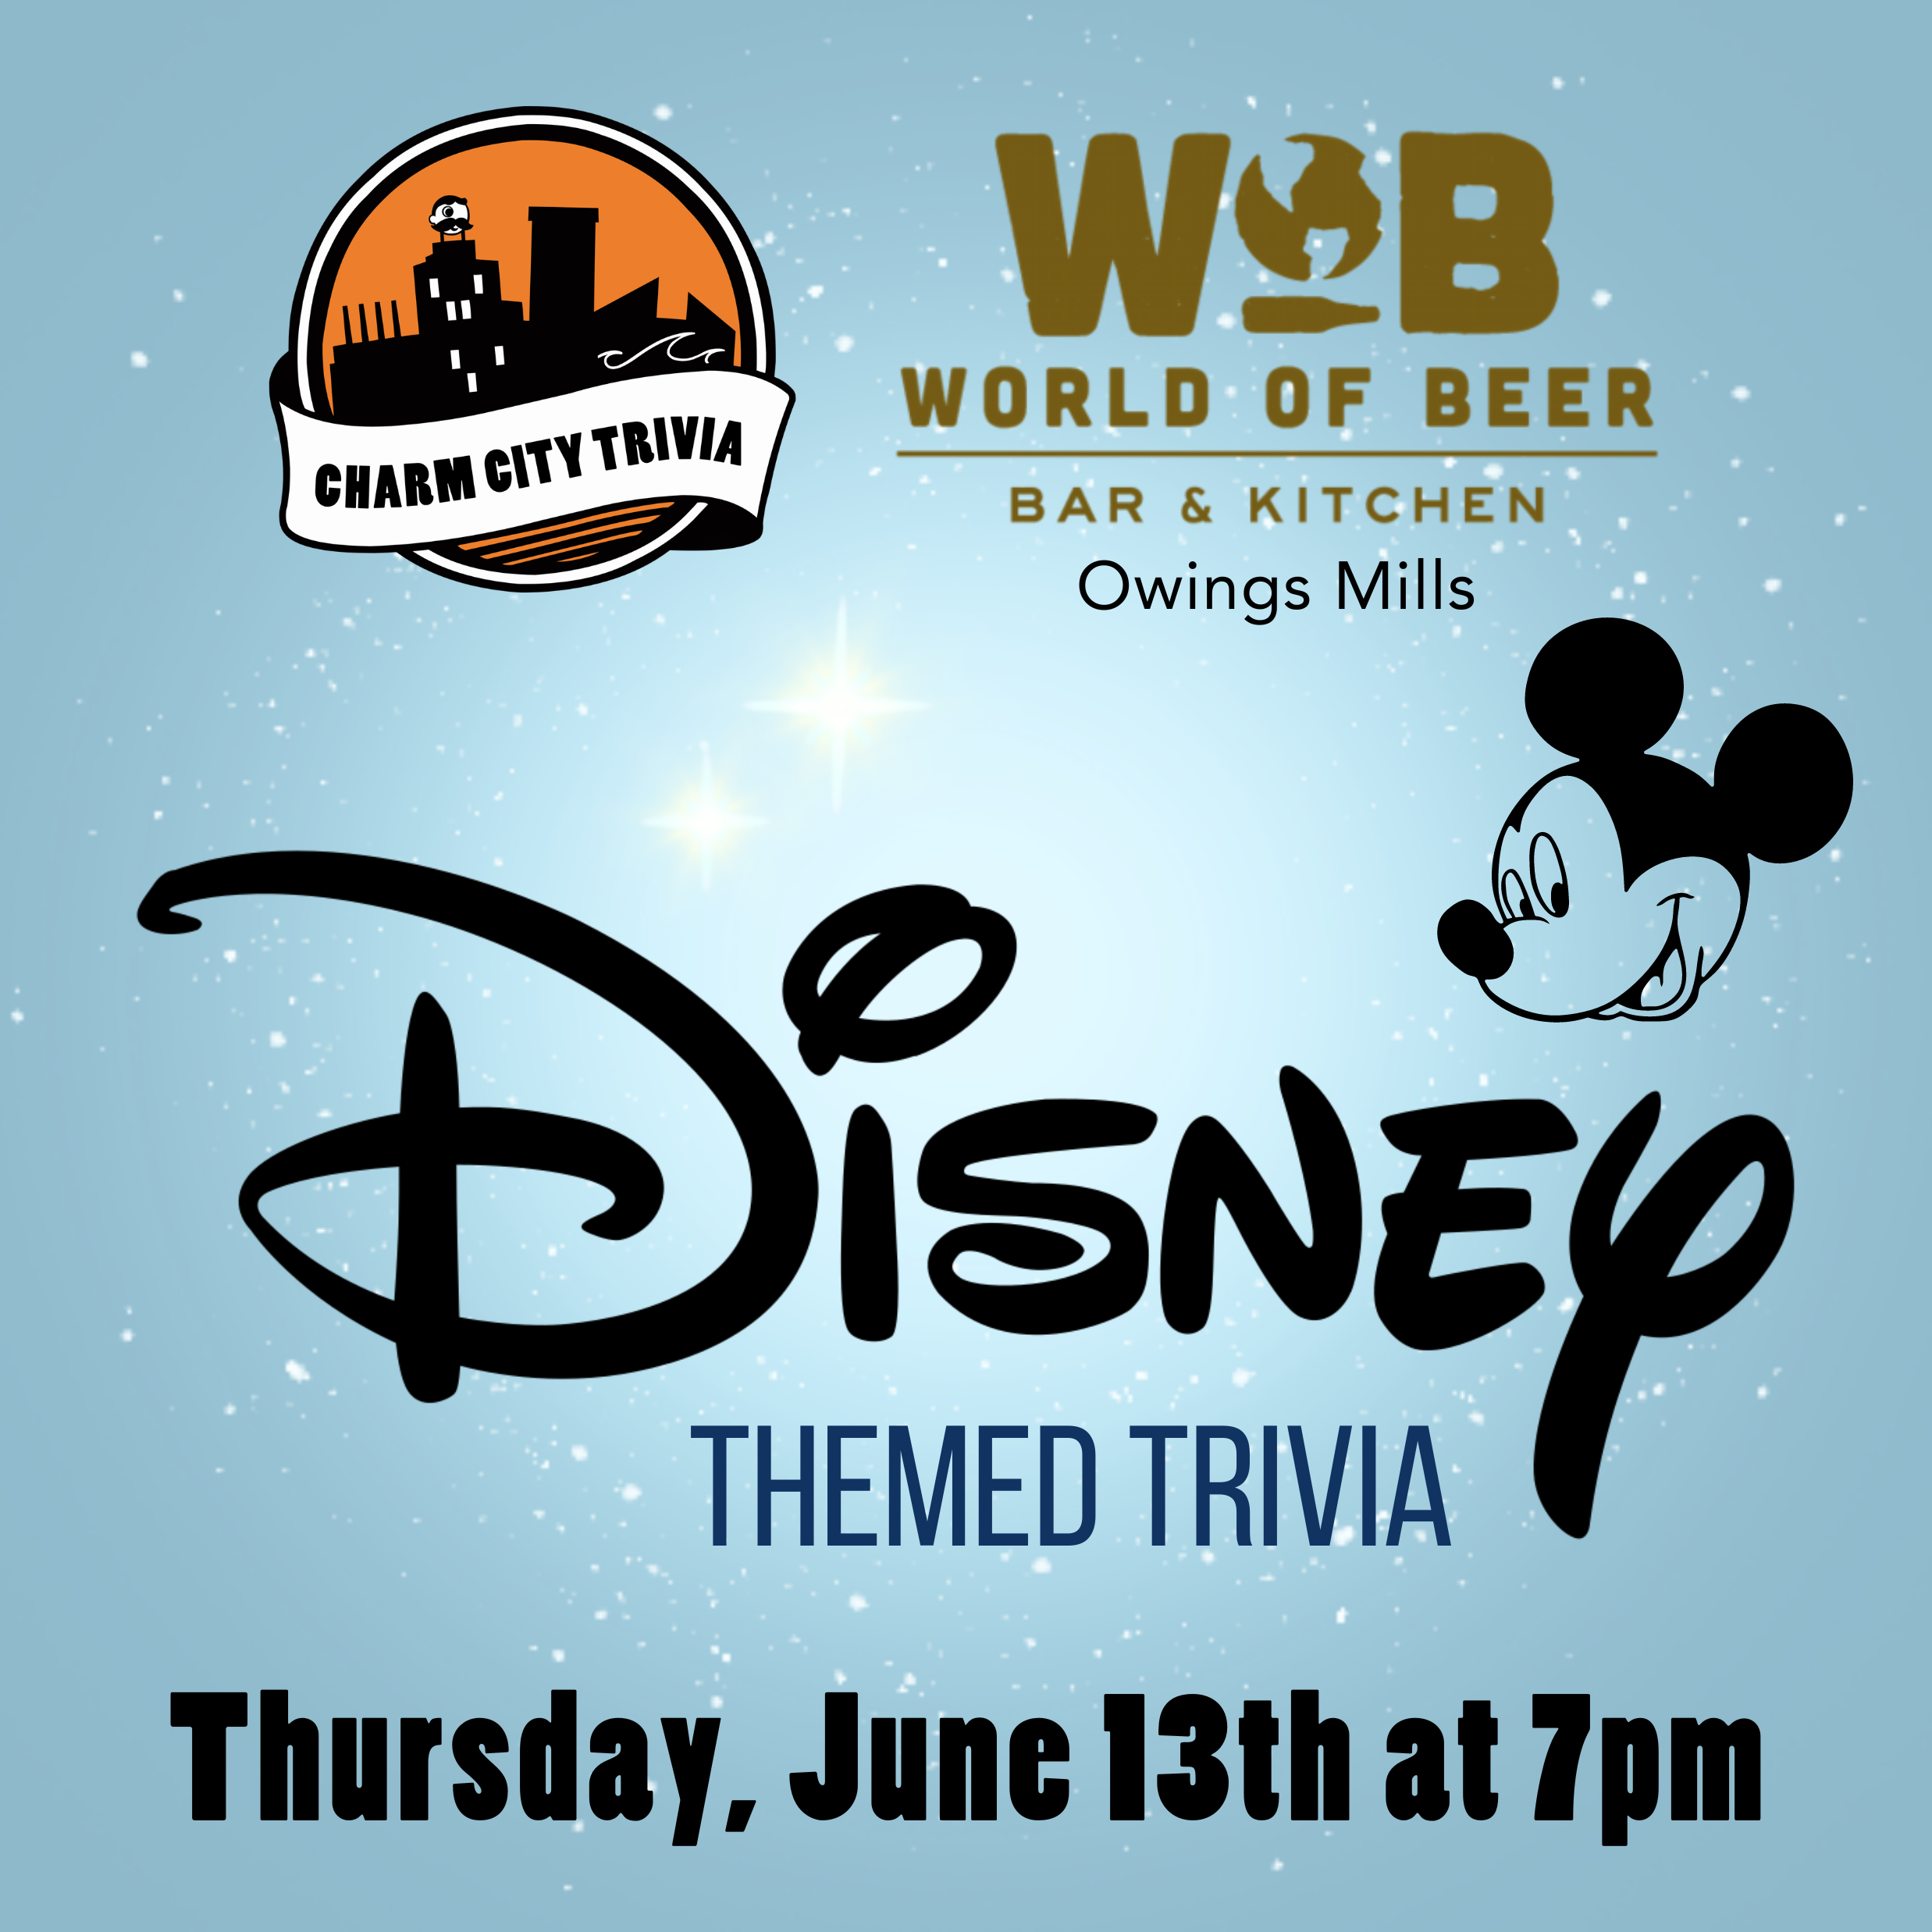 a medium blue background with a lighter center and stars, the charm city trivia logo, world of beer owings mills logo, disney logo, peter pan stars, mickey mouse, and black text. the text reads: thursday, june 13th at 7pm